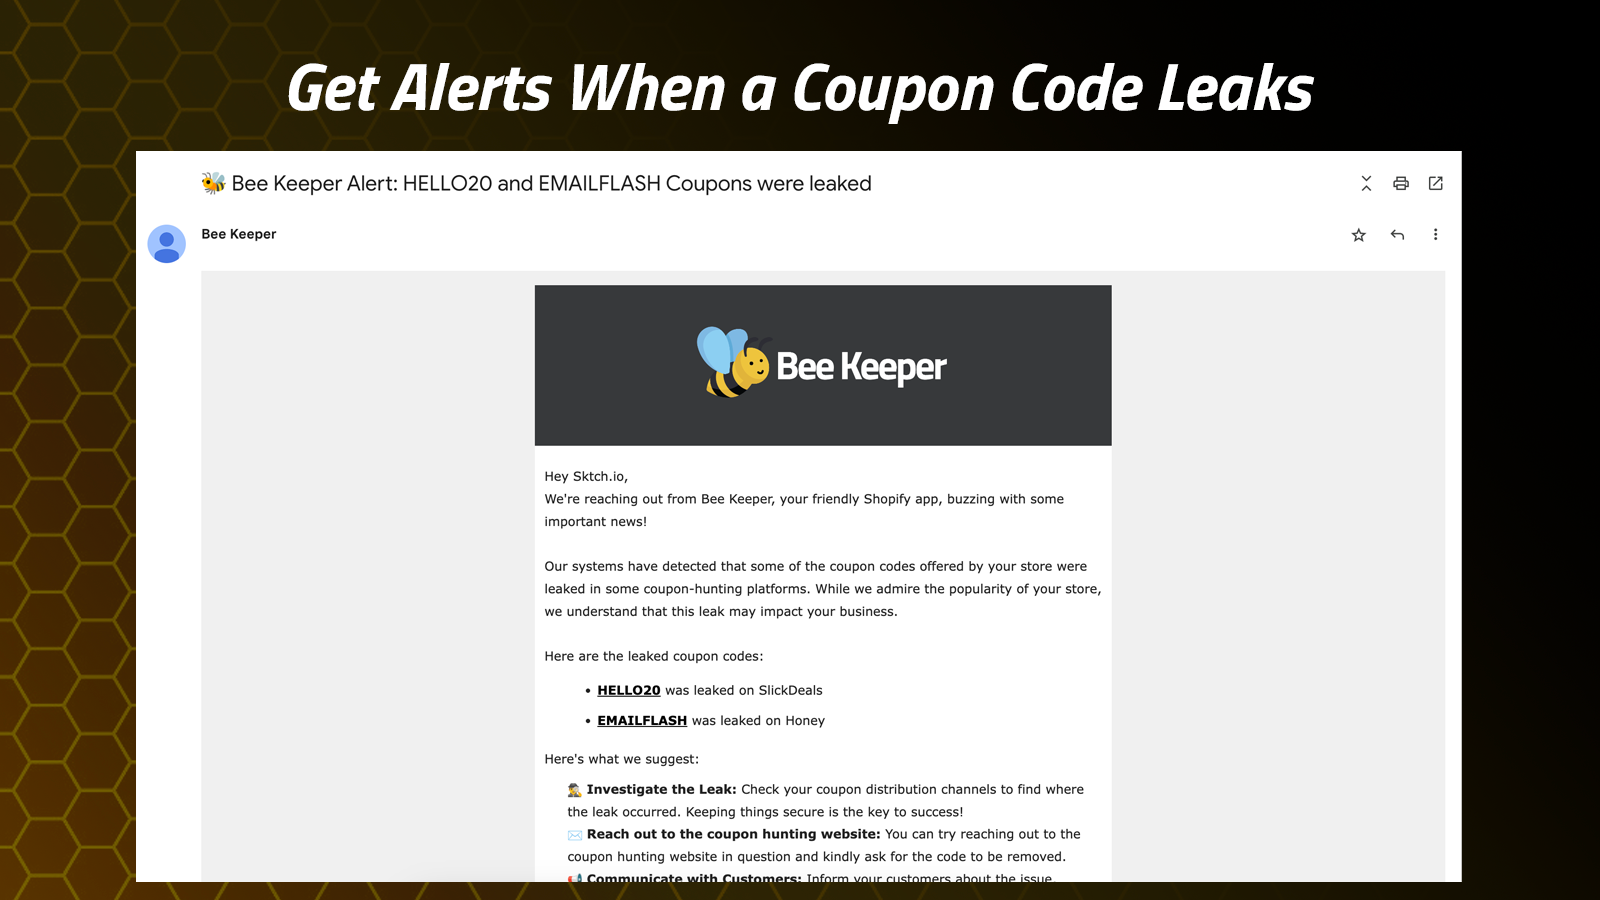 Get Alerts When a Coupon Code Leaks